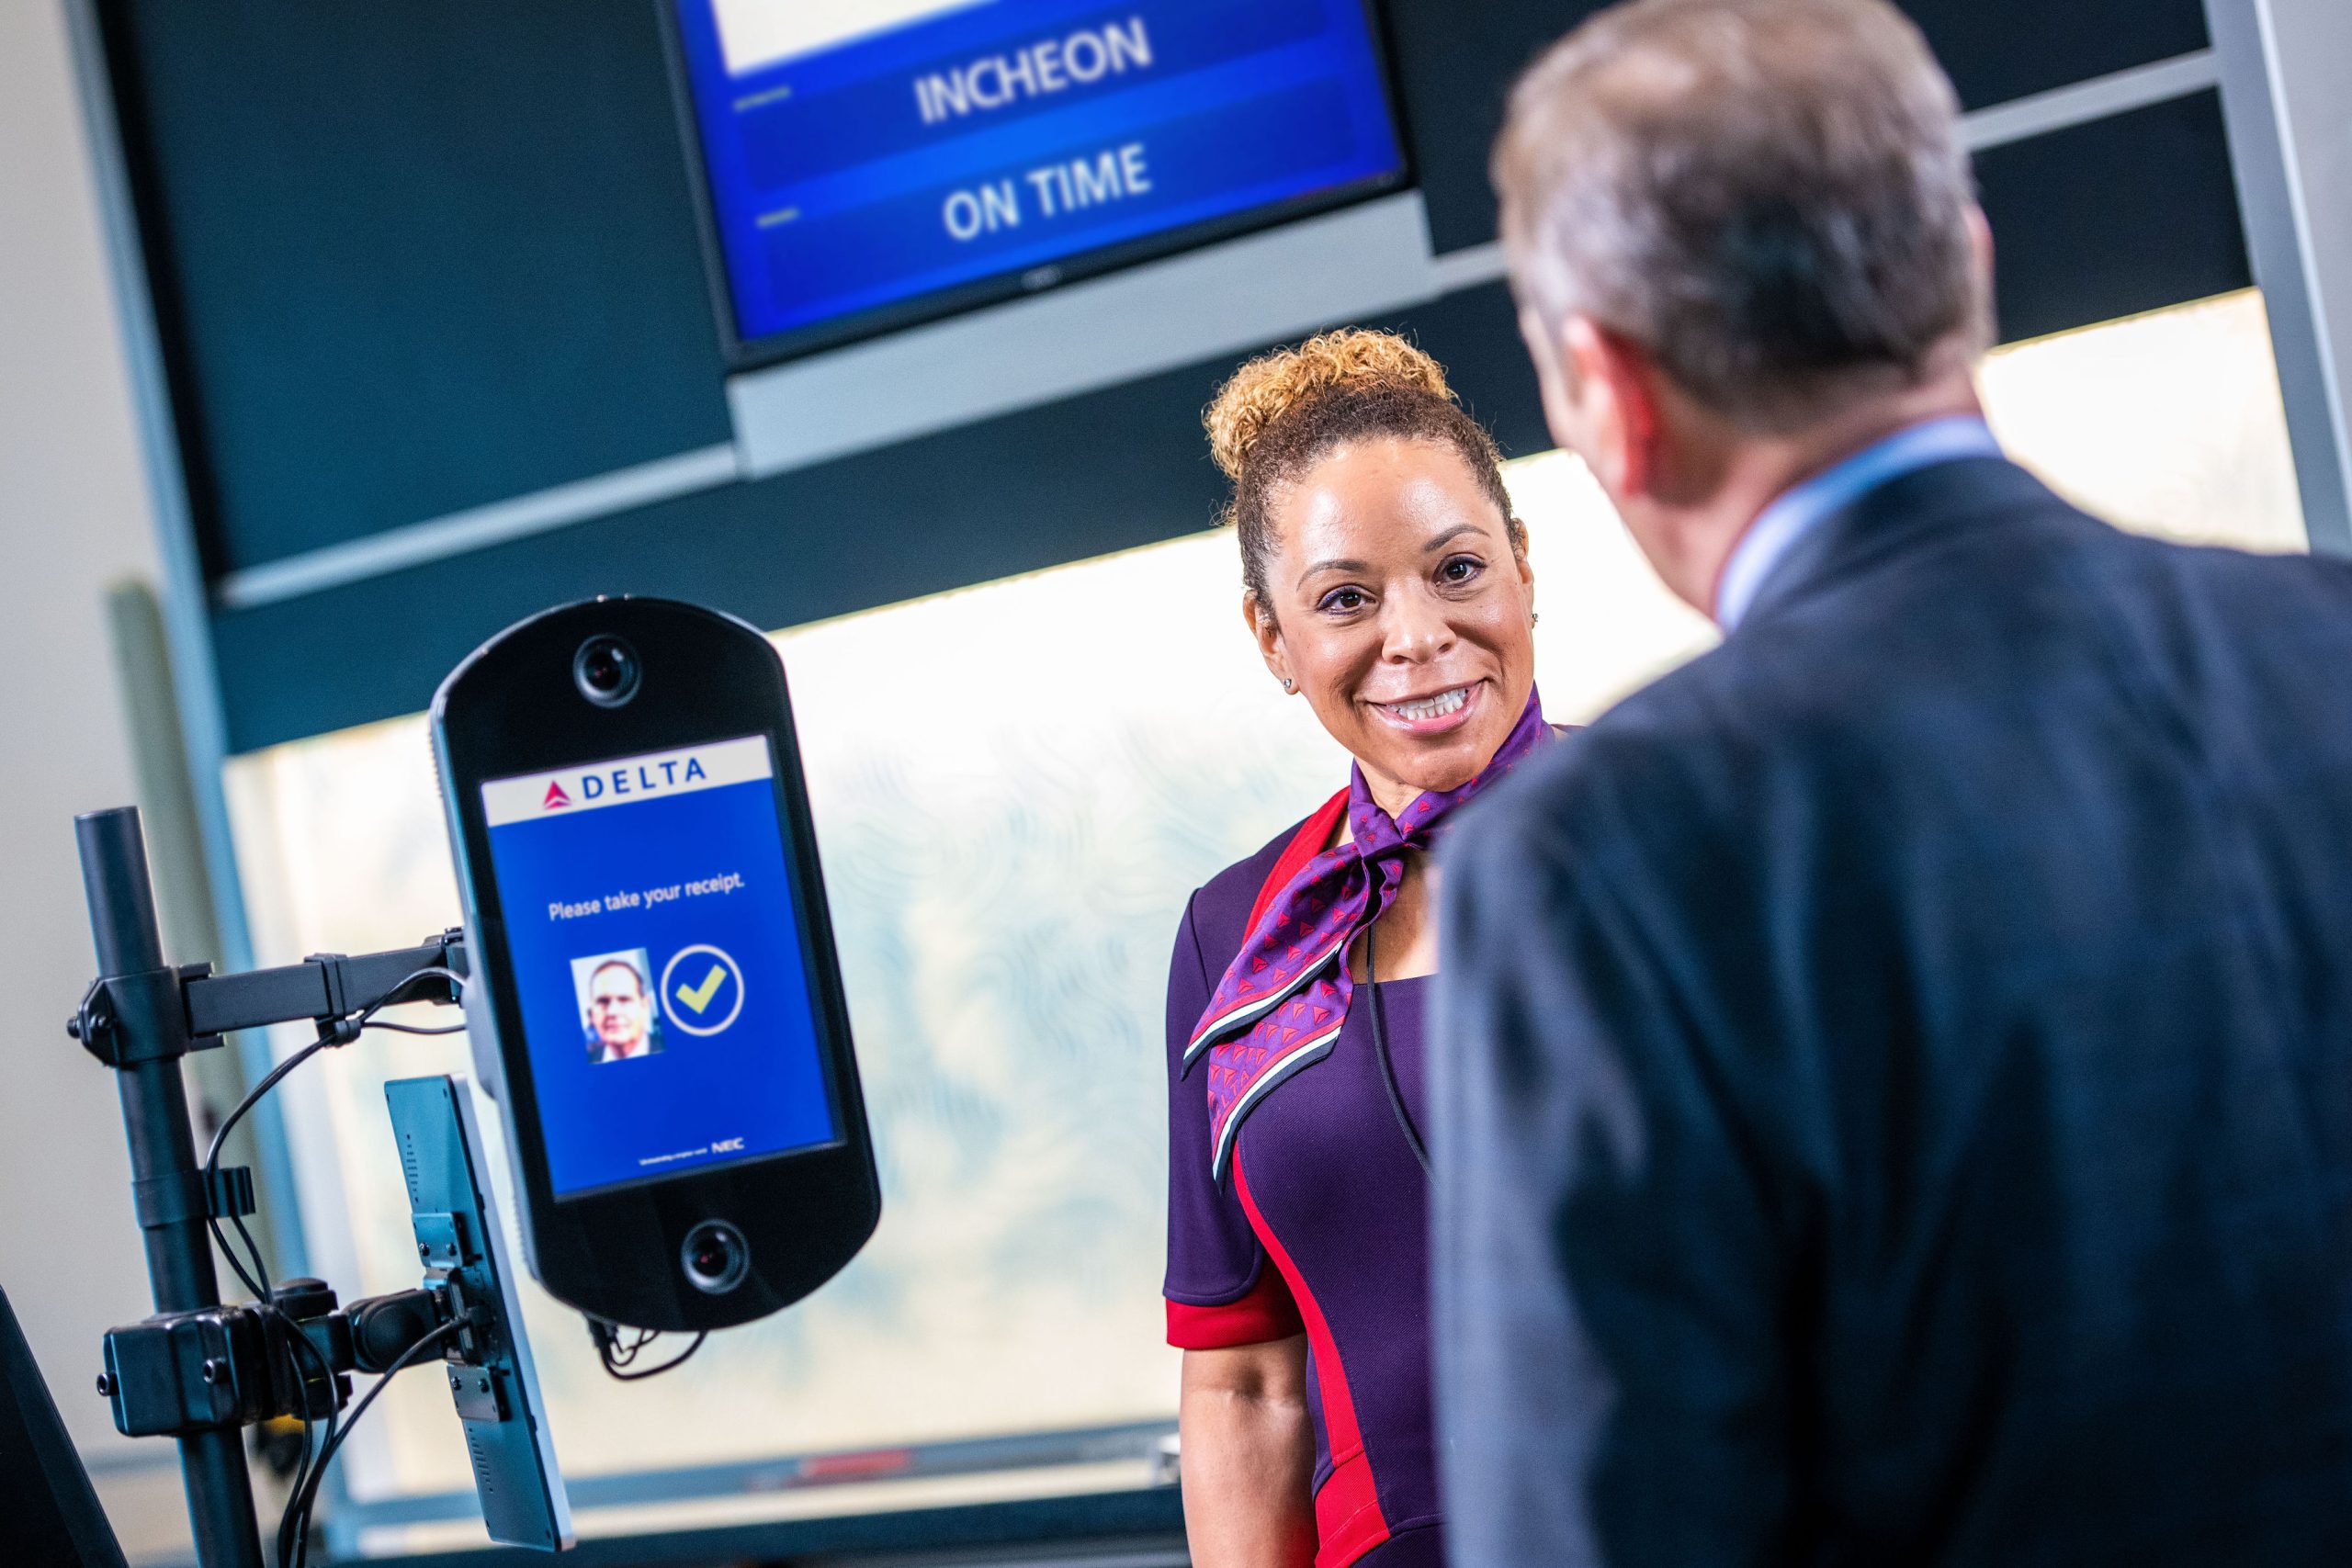 Facial recognition technology at airports is just the start: The five questions we need to be asking